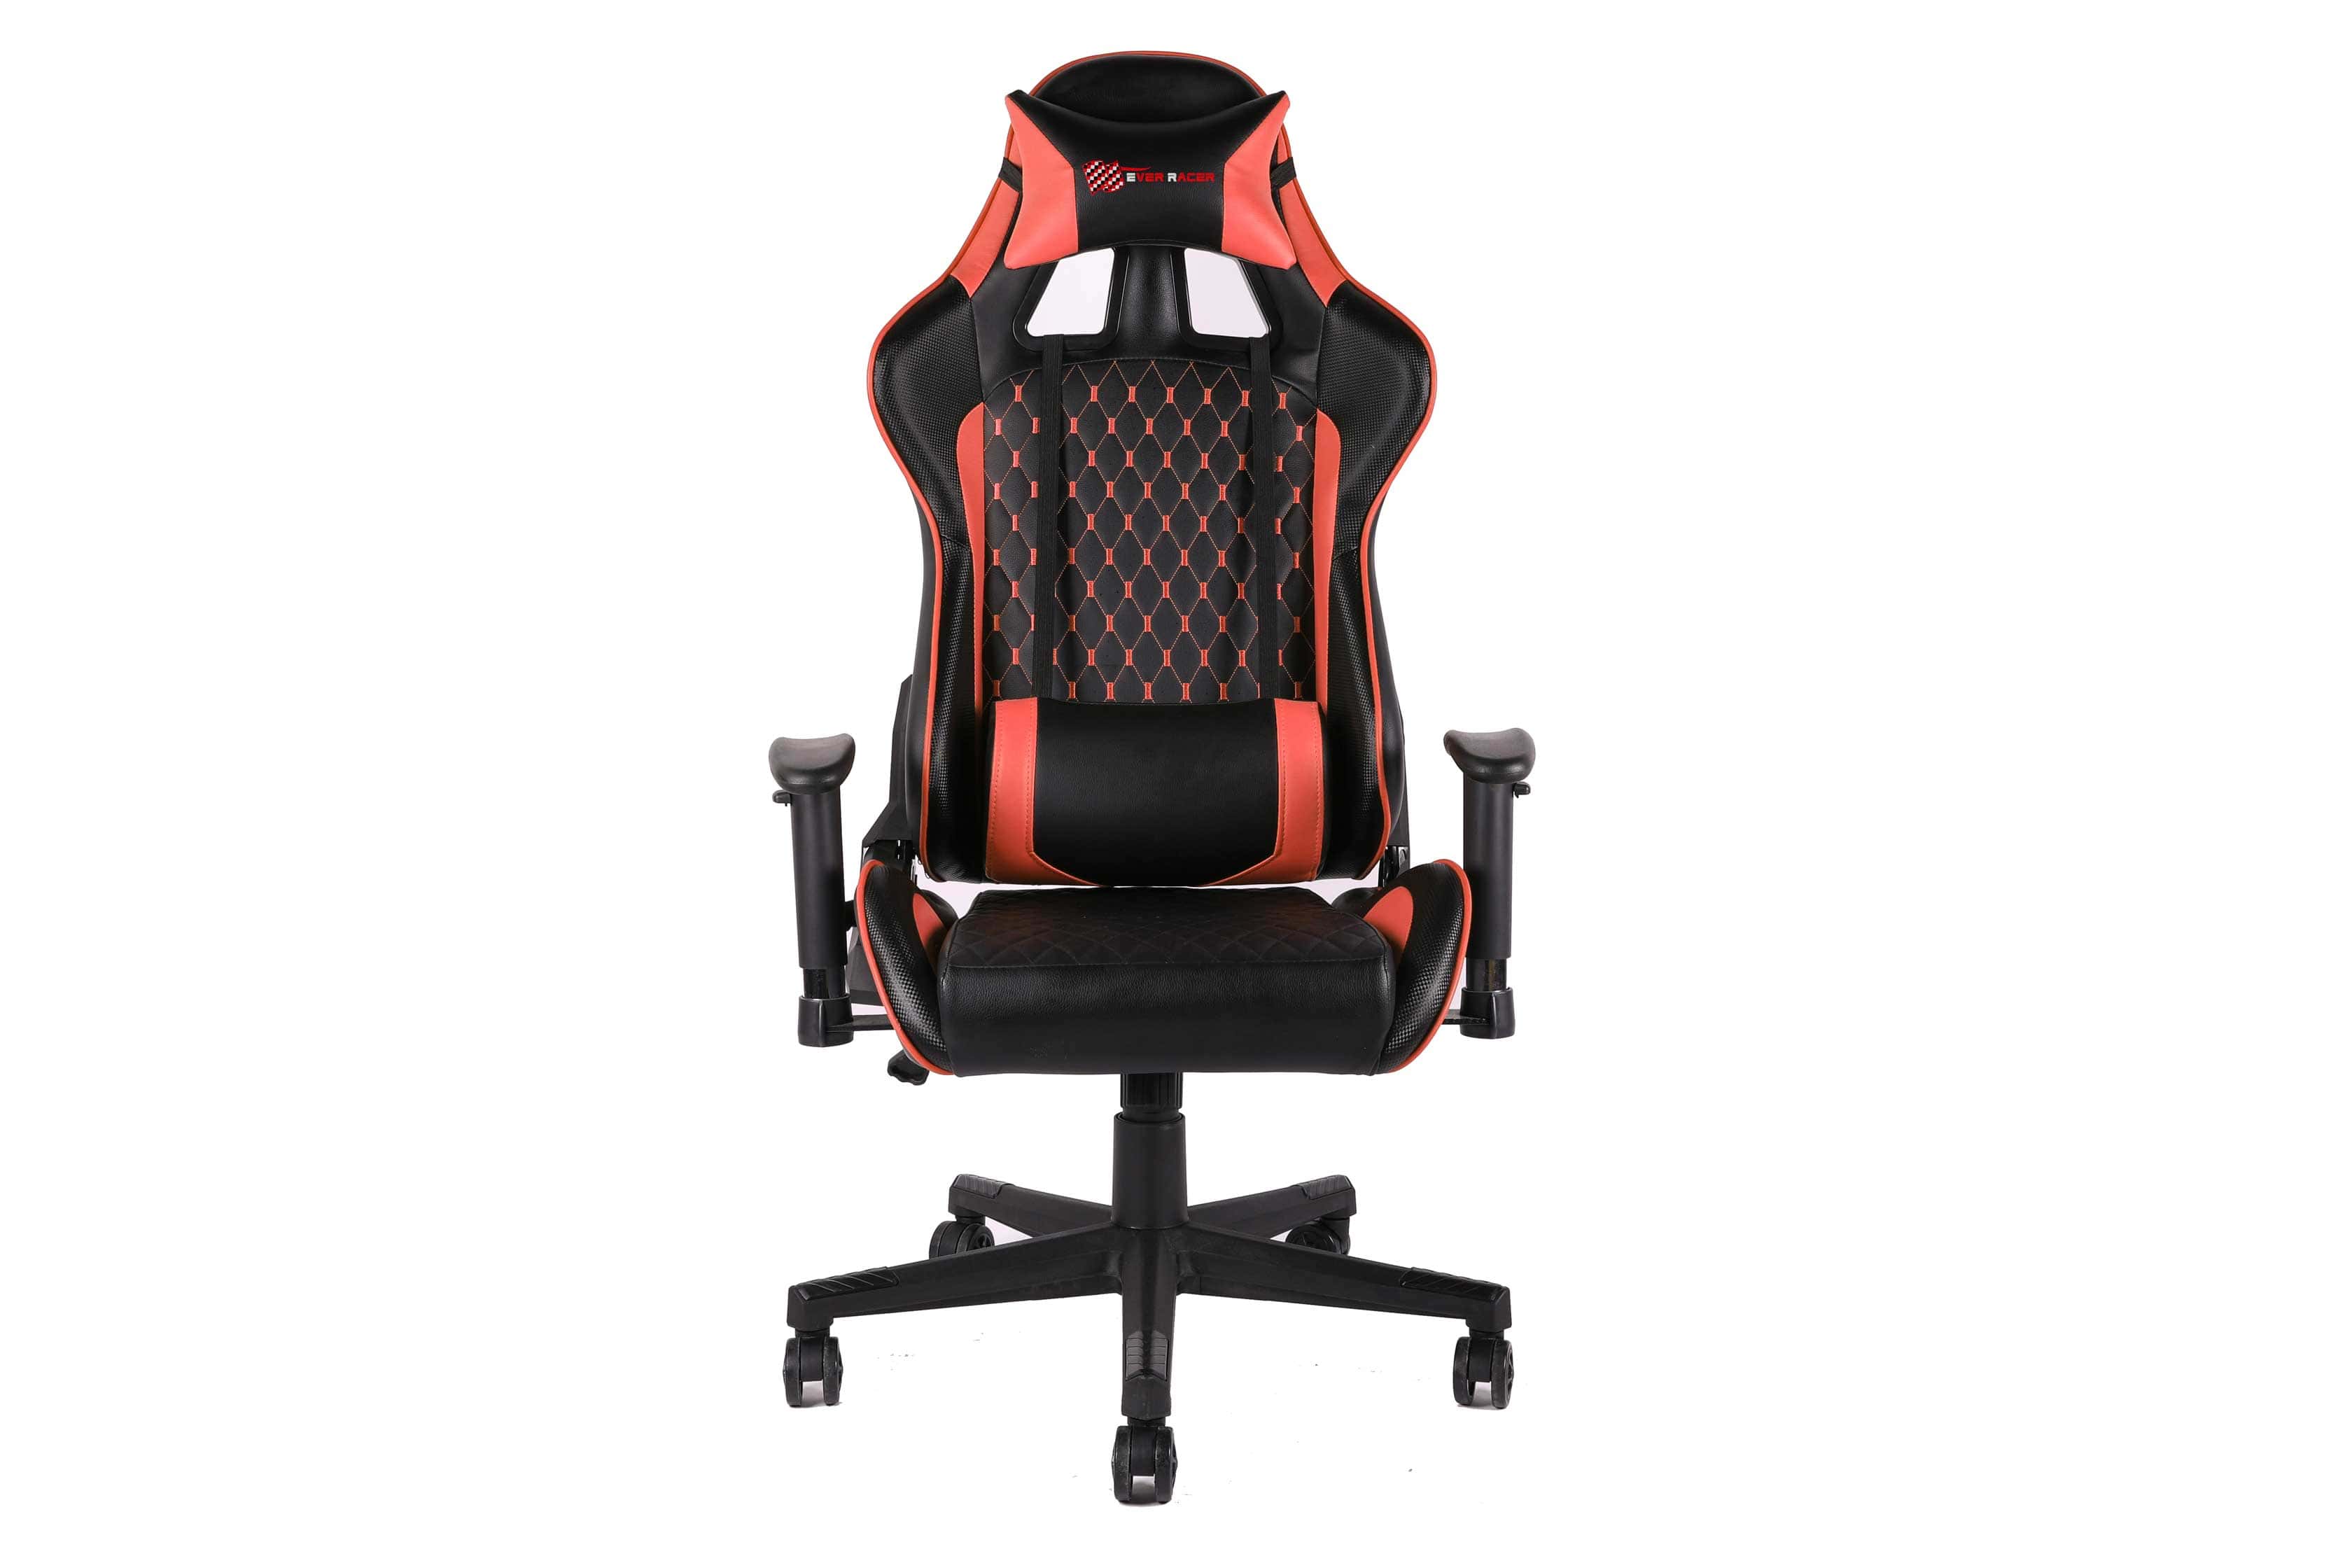 New EverRacer Gaming Office Chair PU Leather Black & Red